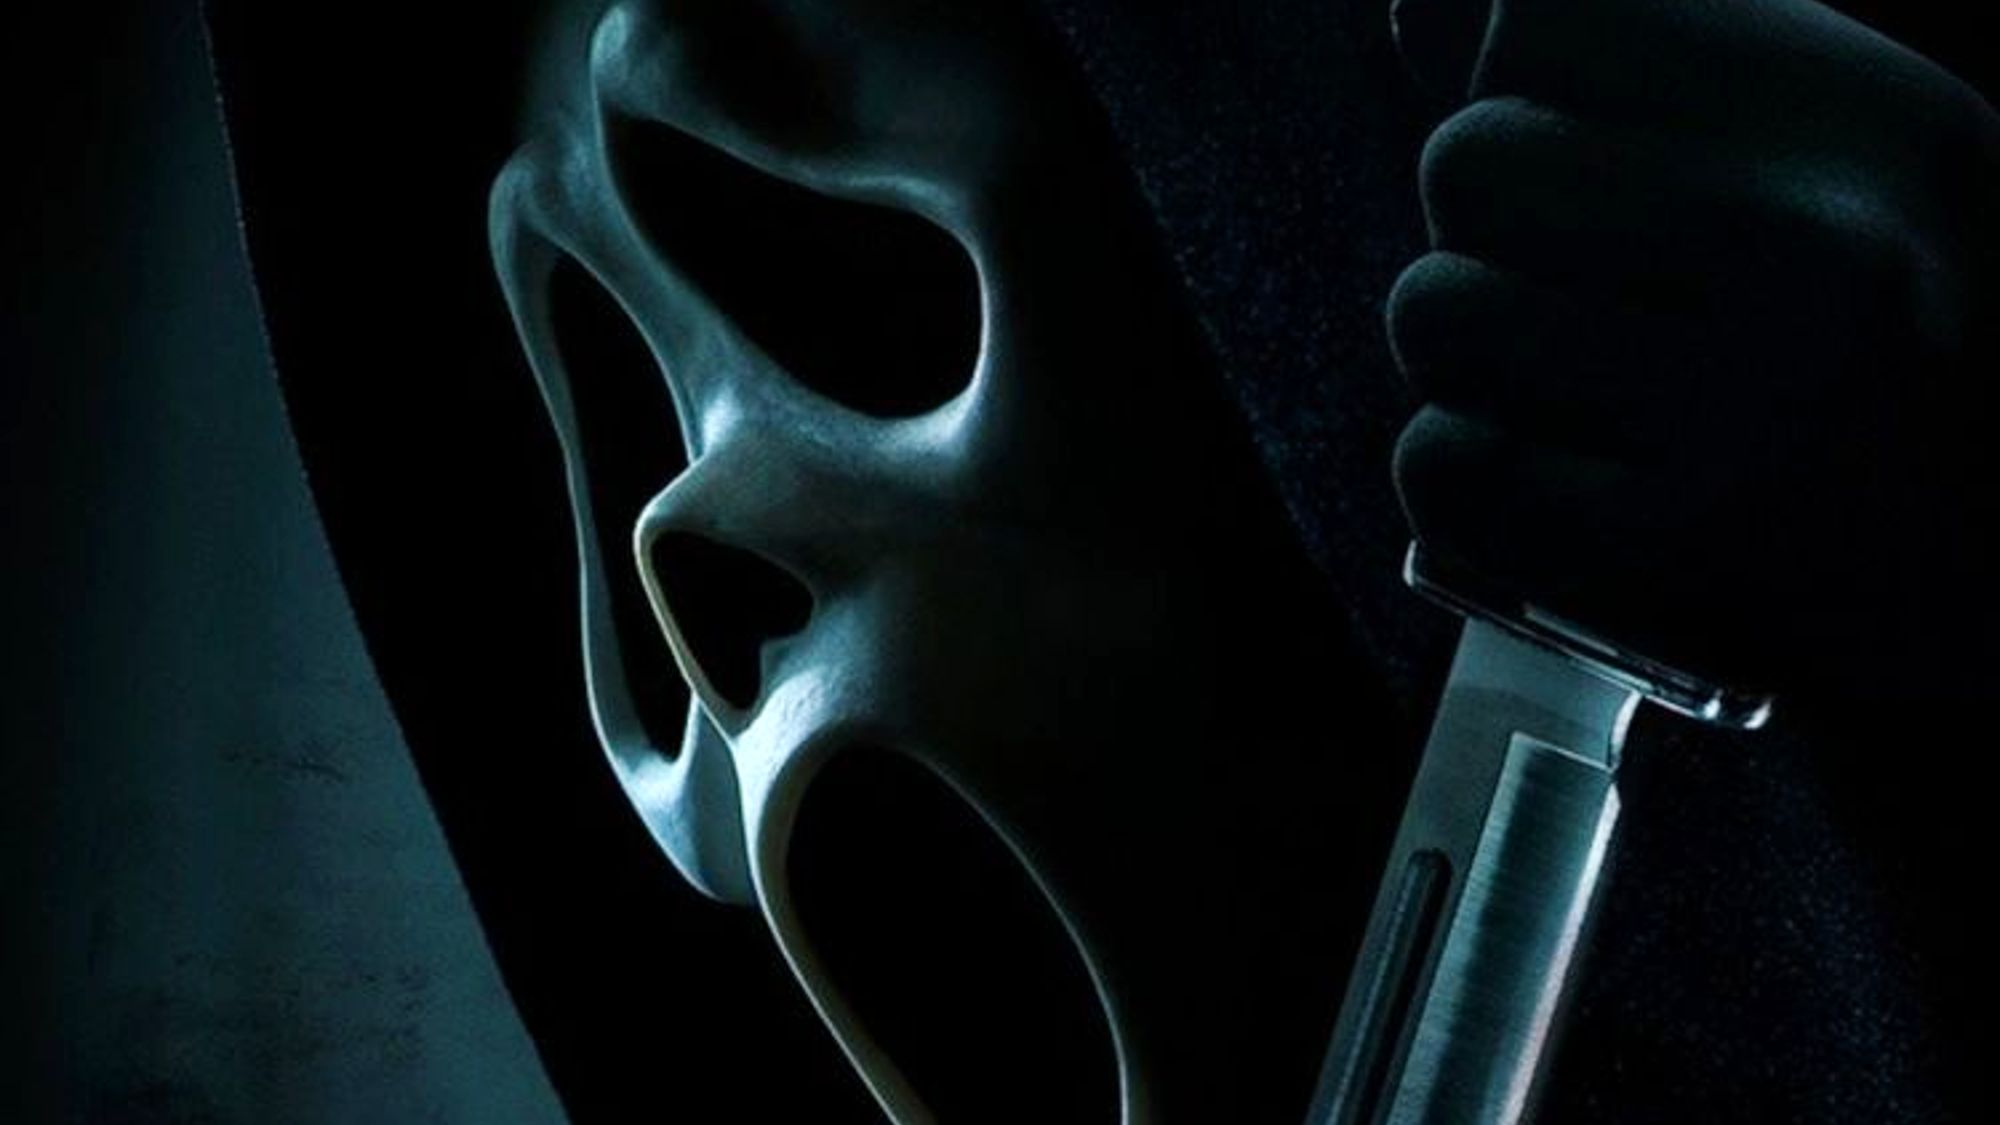 Ghostface holding a knife on the Scream 2022 movie poster